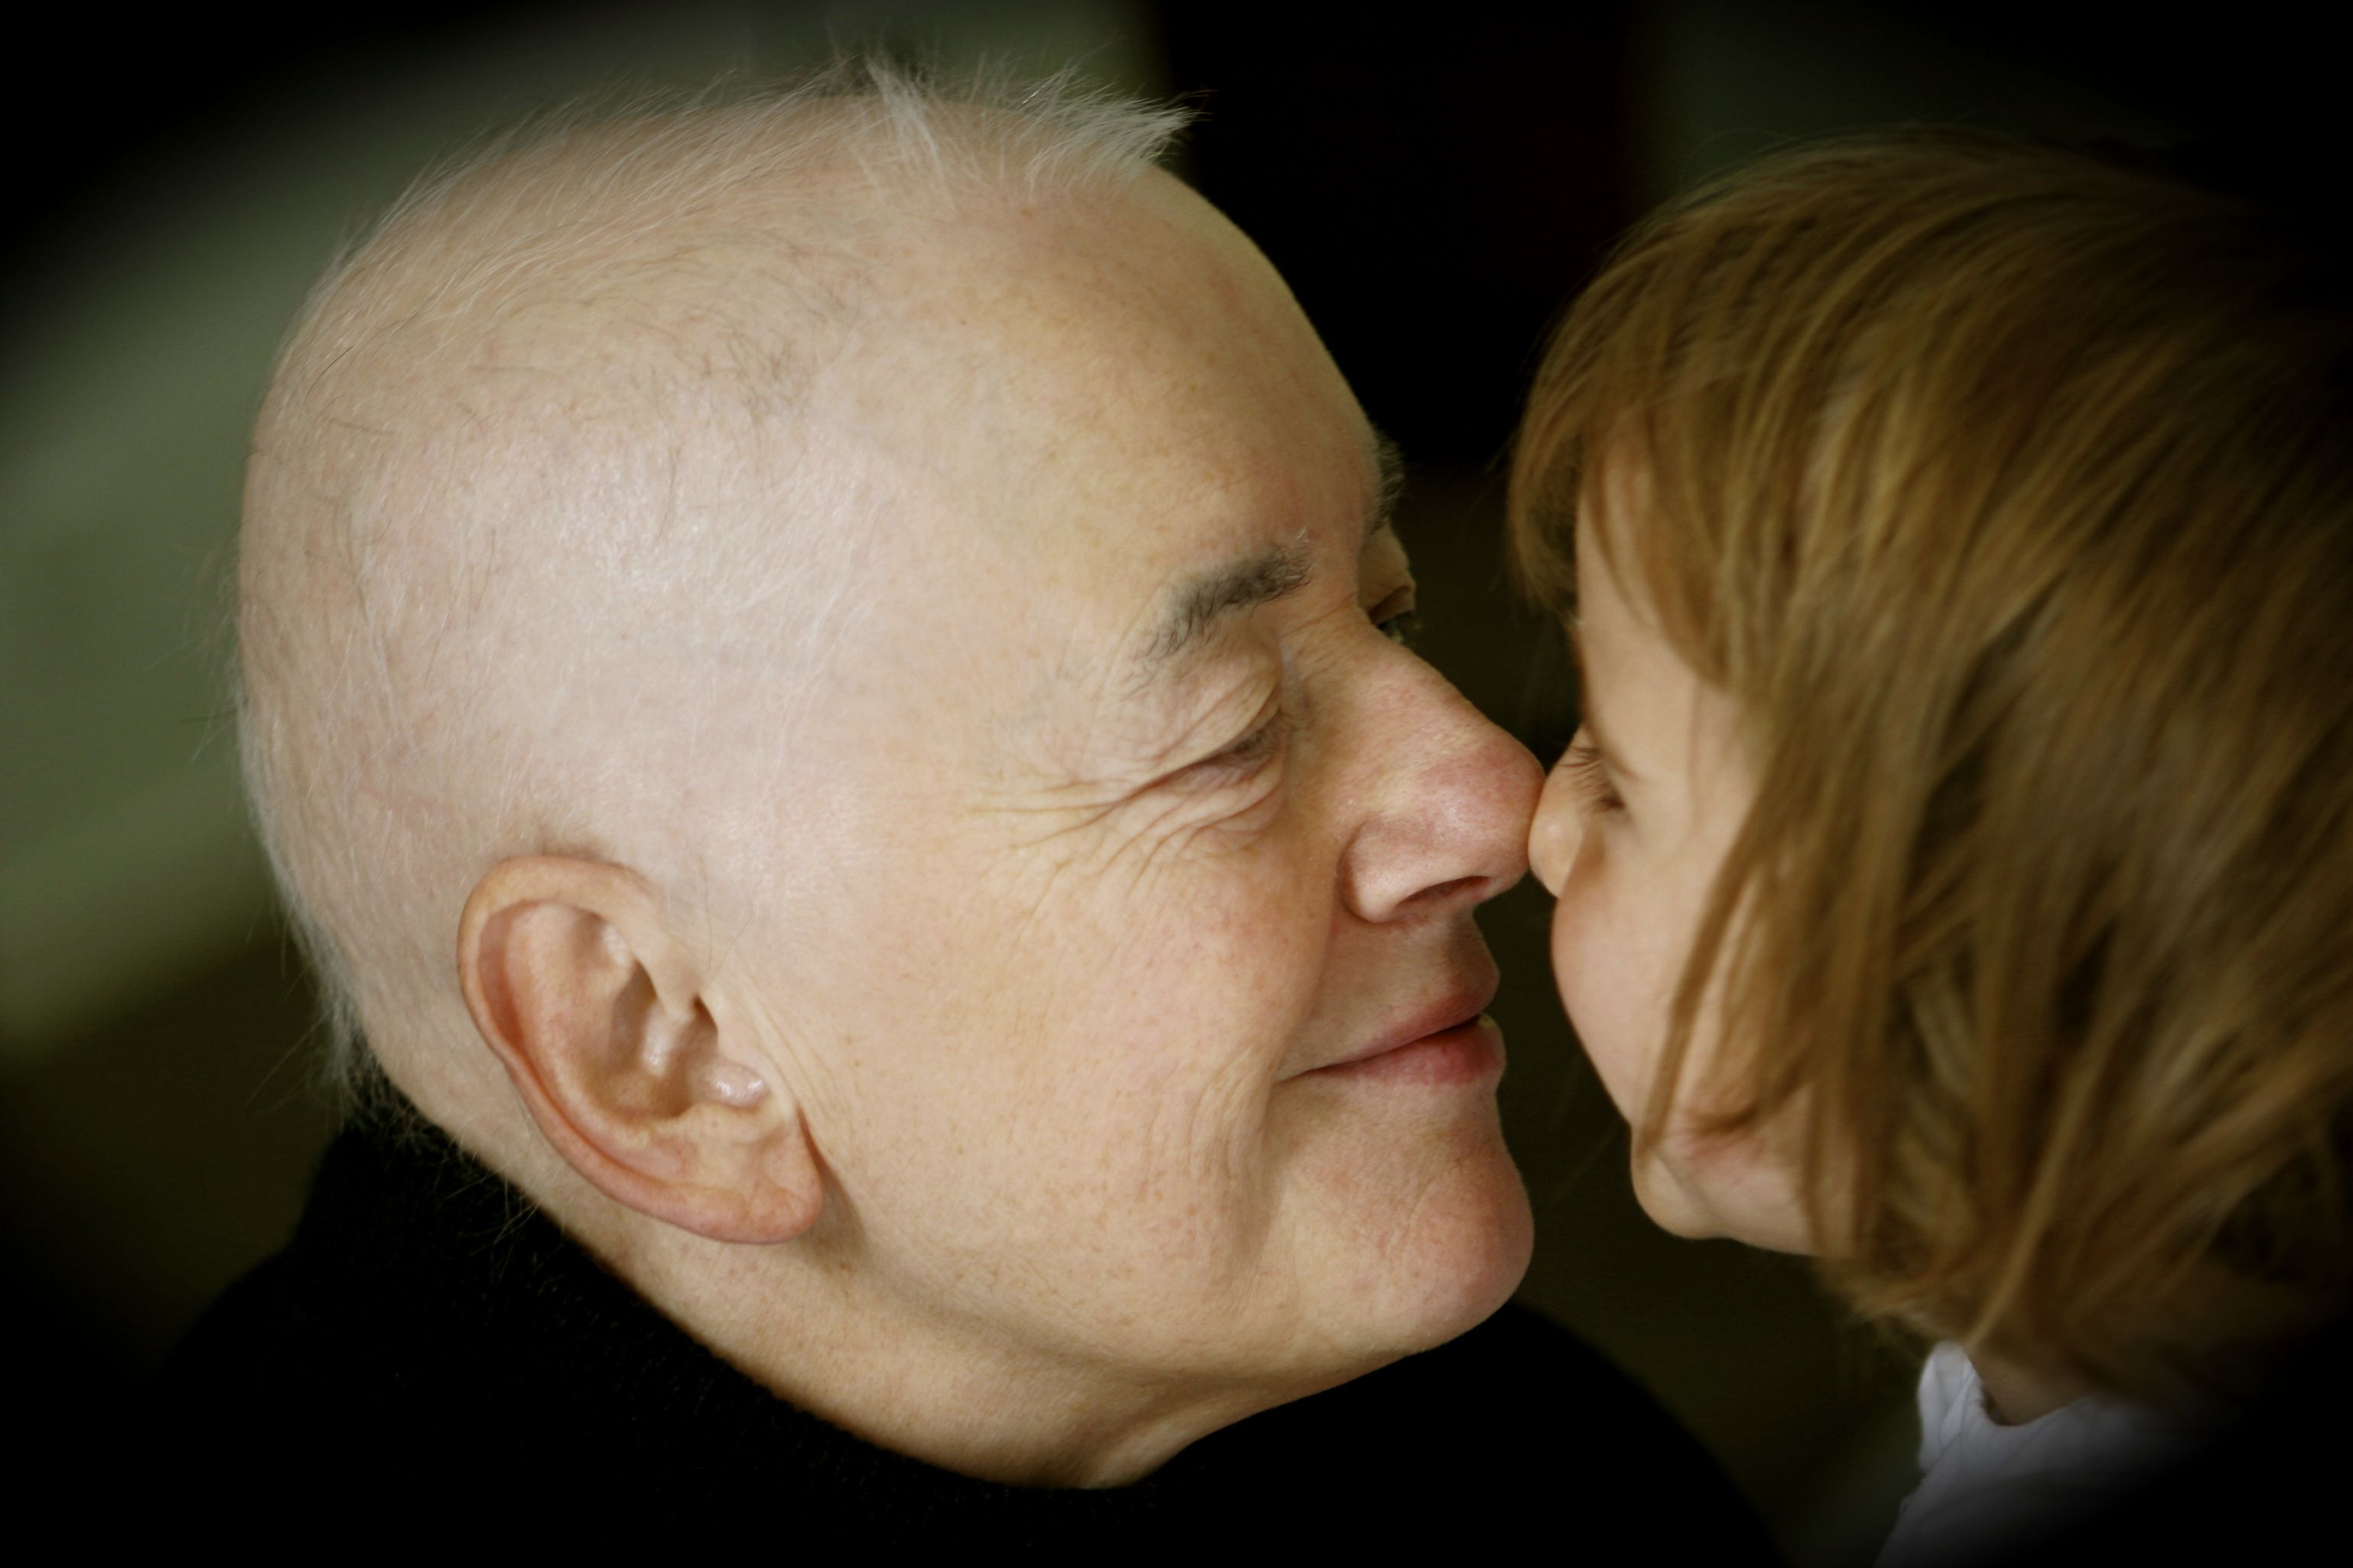 An example of mirroring, a Grandpa and preschool child rubbing noses